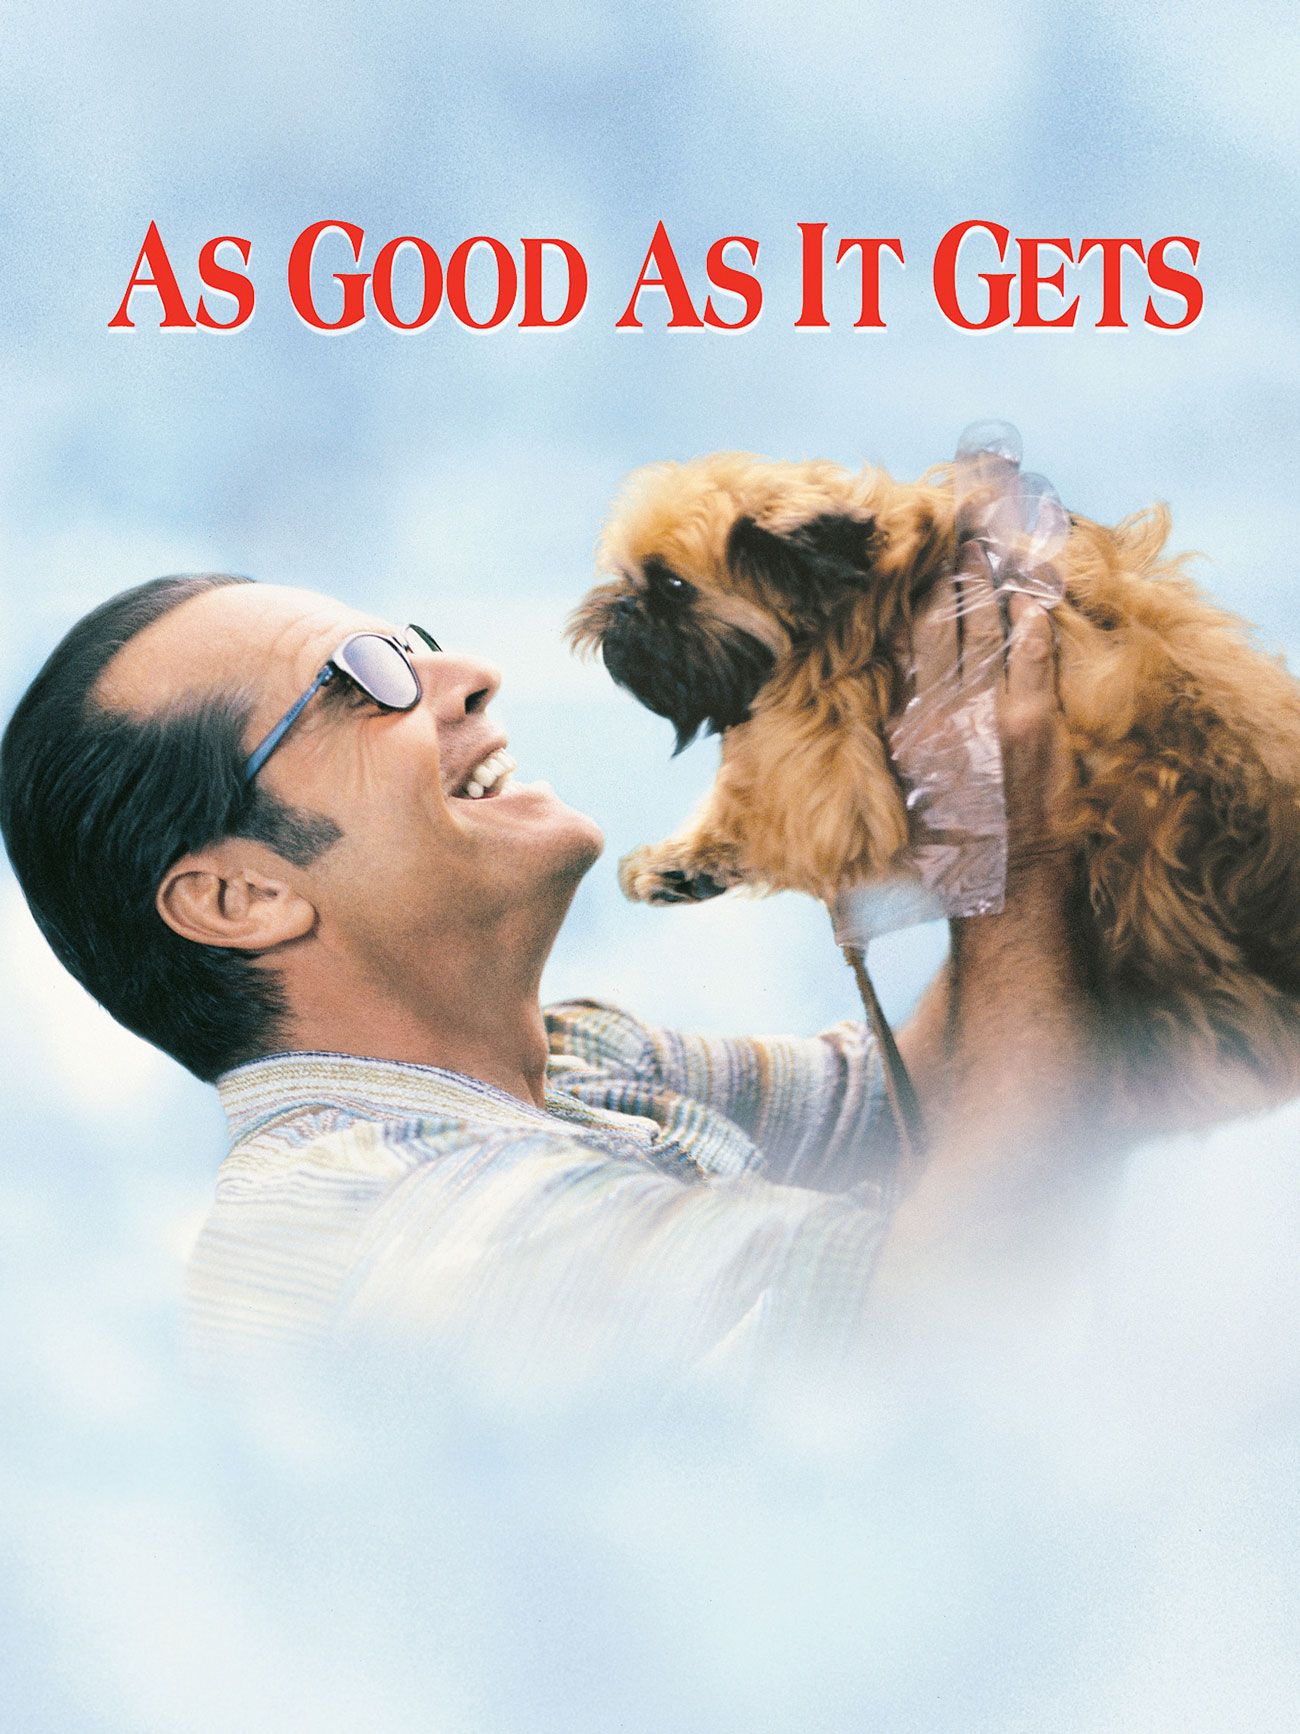 As Good as It Gets (1997) ★★★★☆